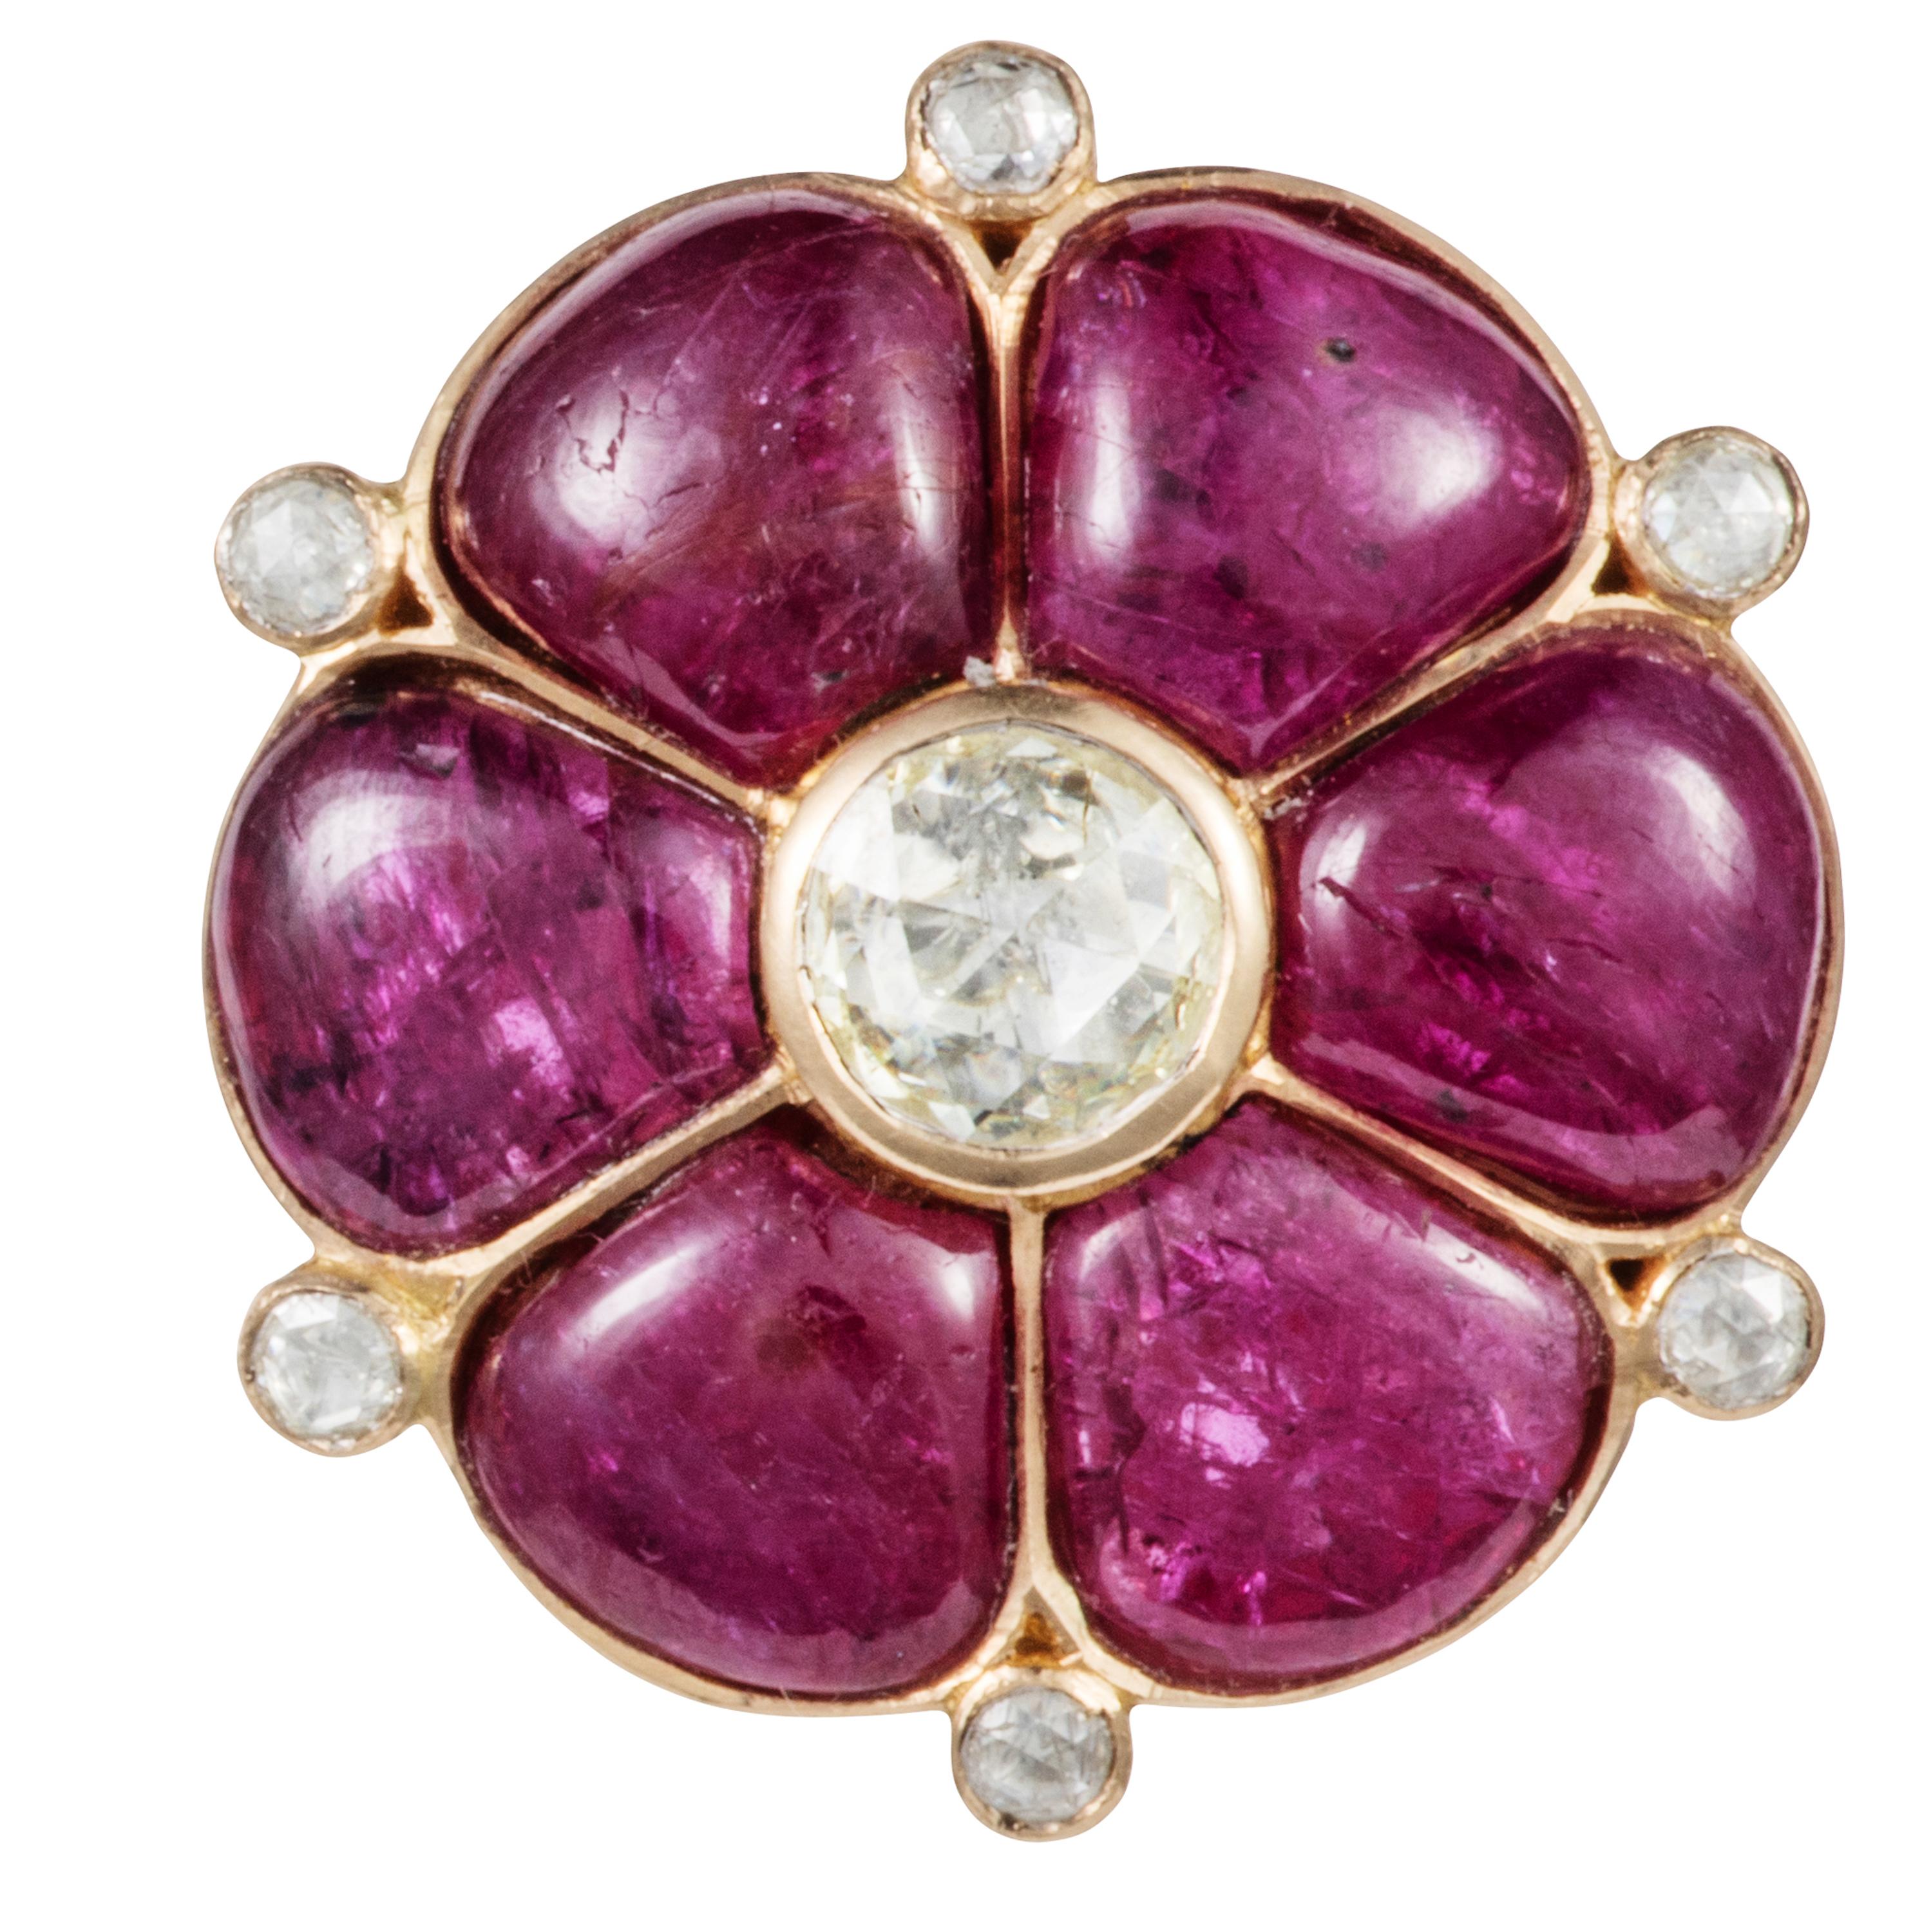 Gross weight: 14.150 grams 
Gold weight: 11.170 grams 
Diamond weight: 0.74 carats 
Ruby weight: 13.68 carats 

Cabochon rubies glow in their intricate Kundan 18kk gold foil setting interspersed with bright diamonds.  Inspired by the shape of an